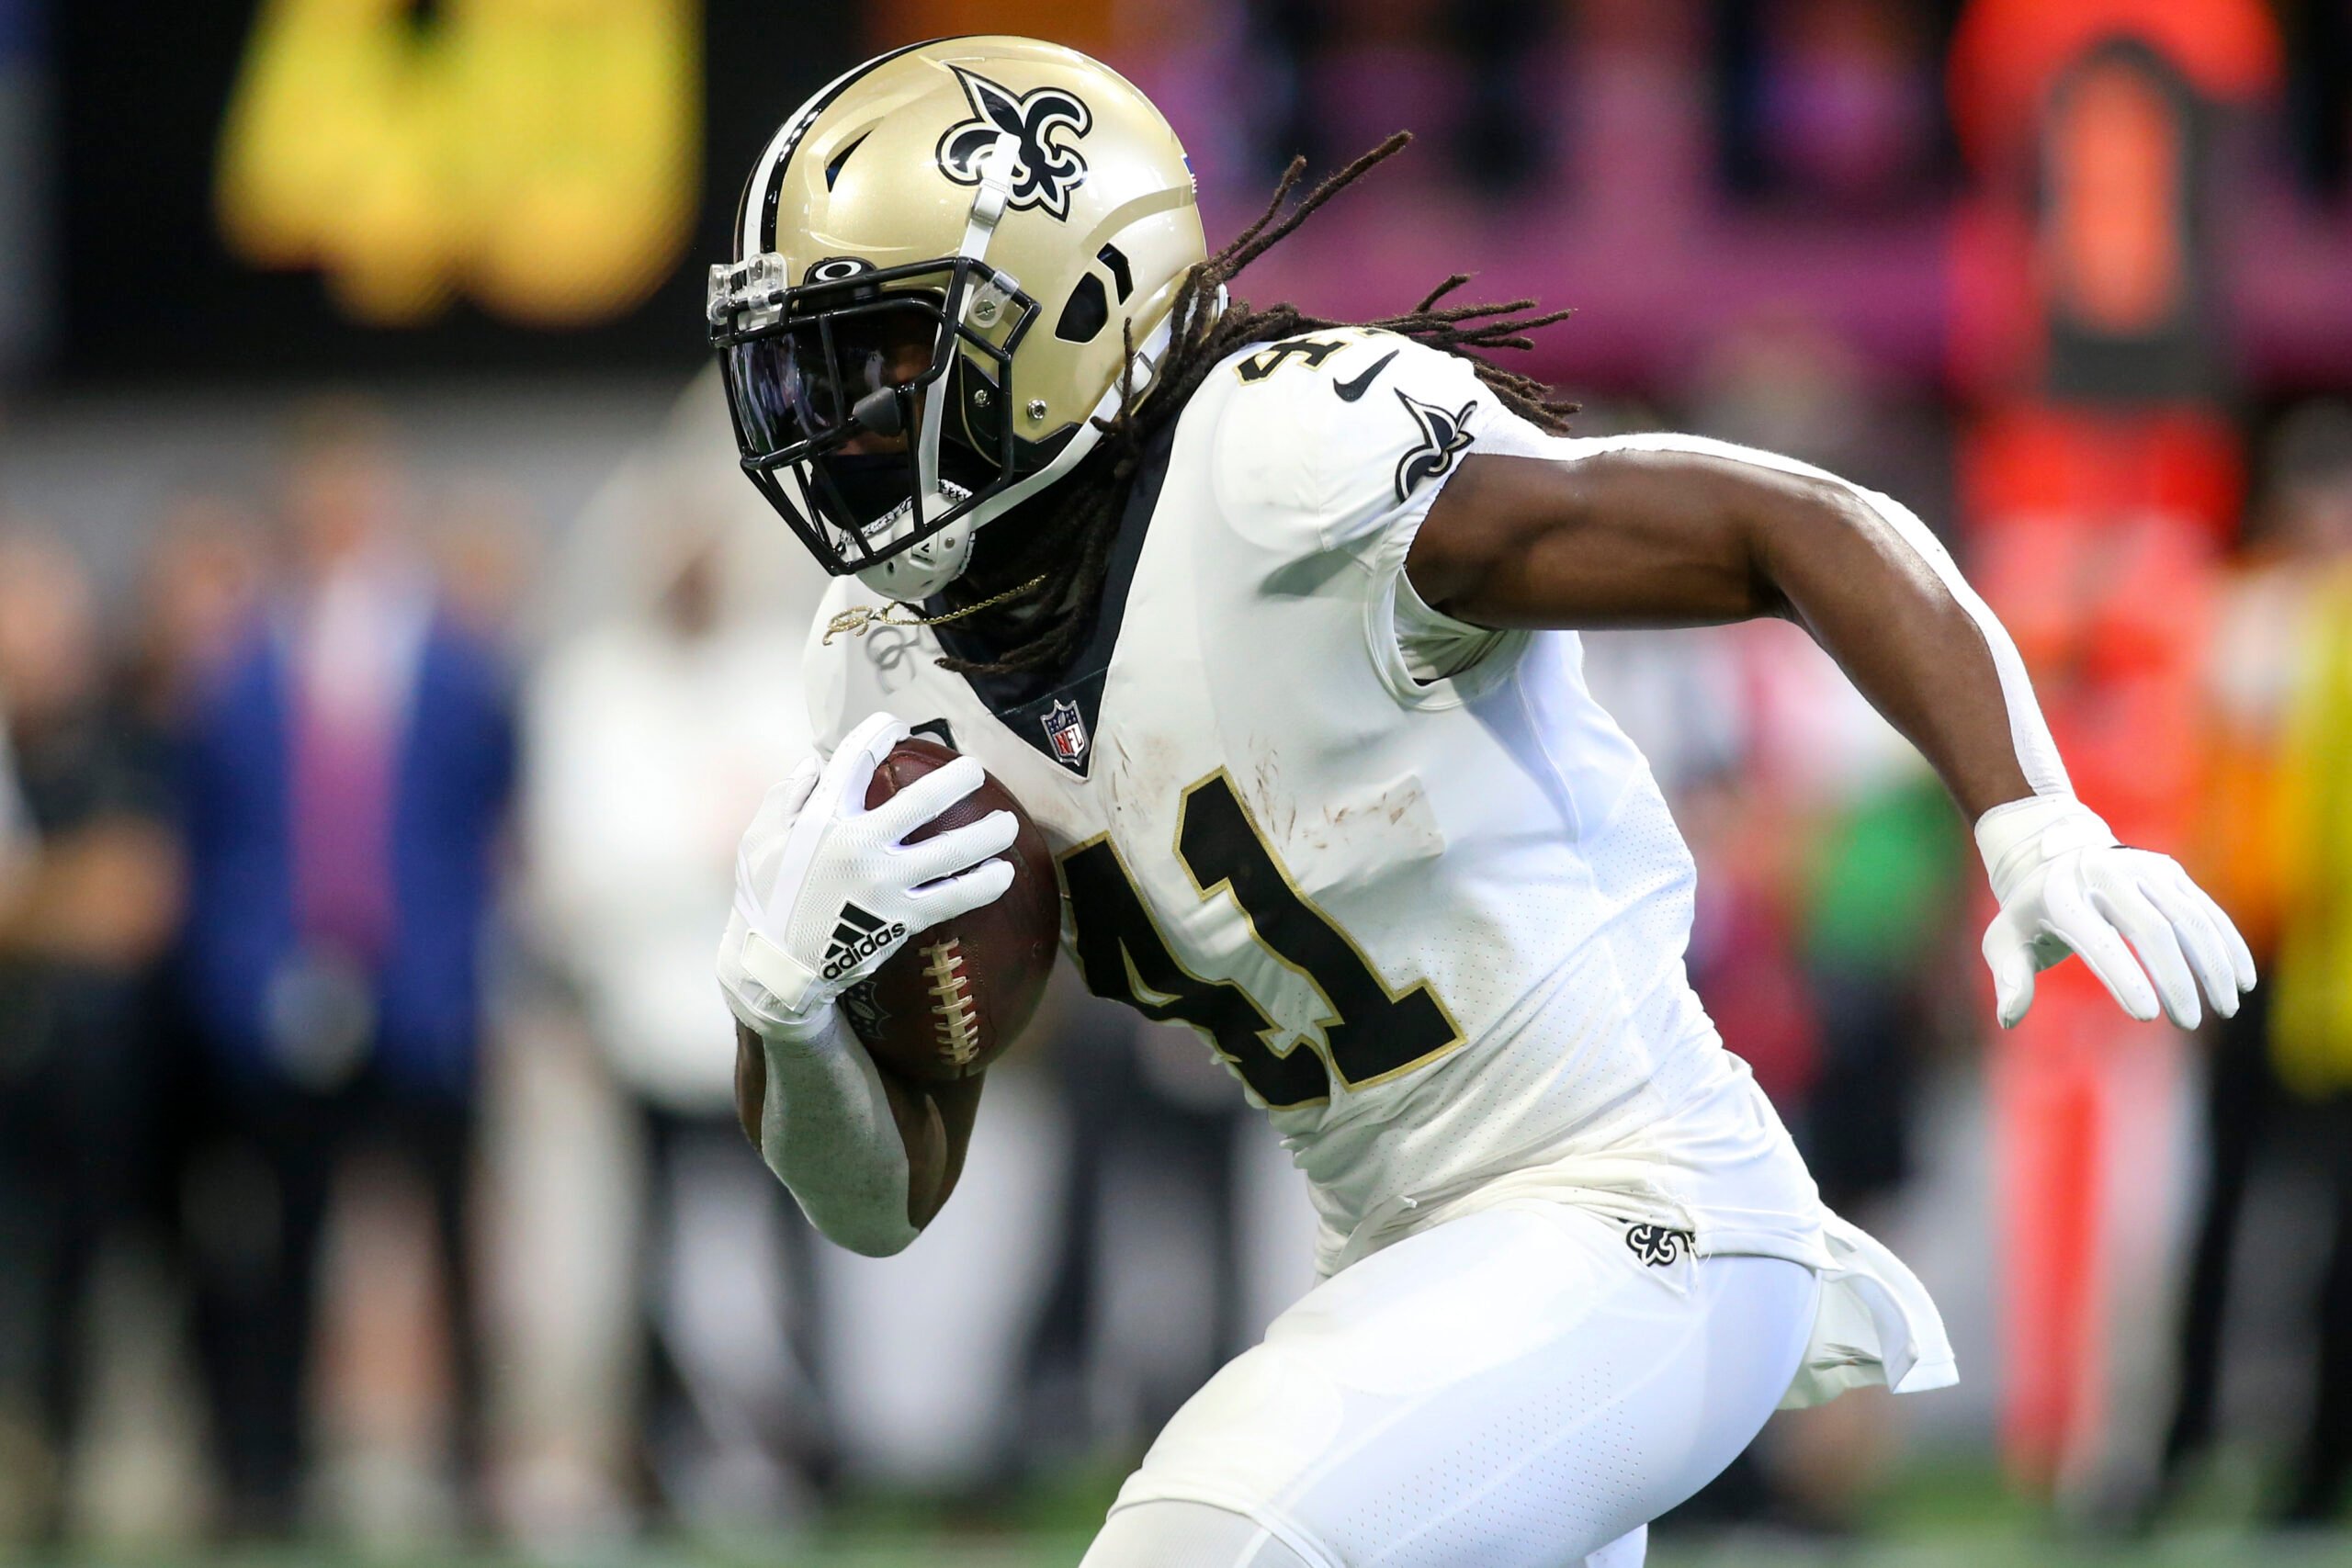 It's official, Kamara out for Saints-Bucs game